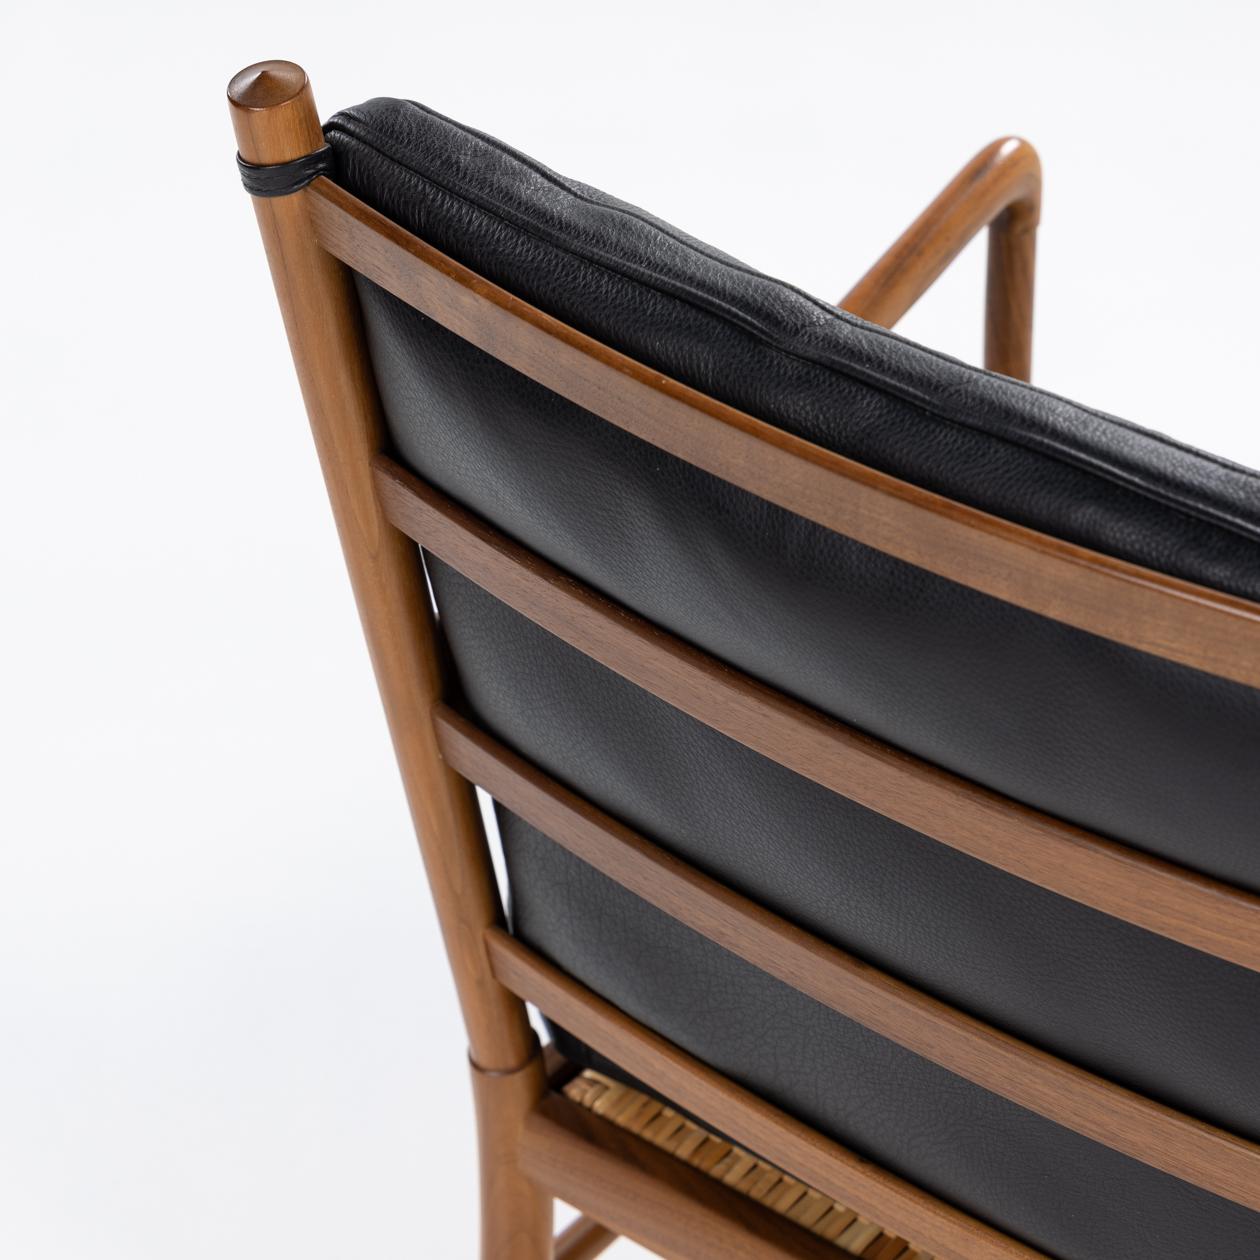 PJ 149 - 'Colonial chair' in black leather and walnut by Ole Wanscher For Sale 1